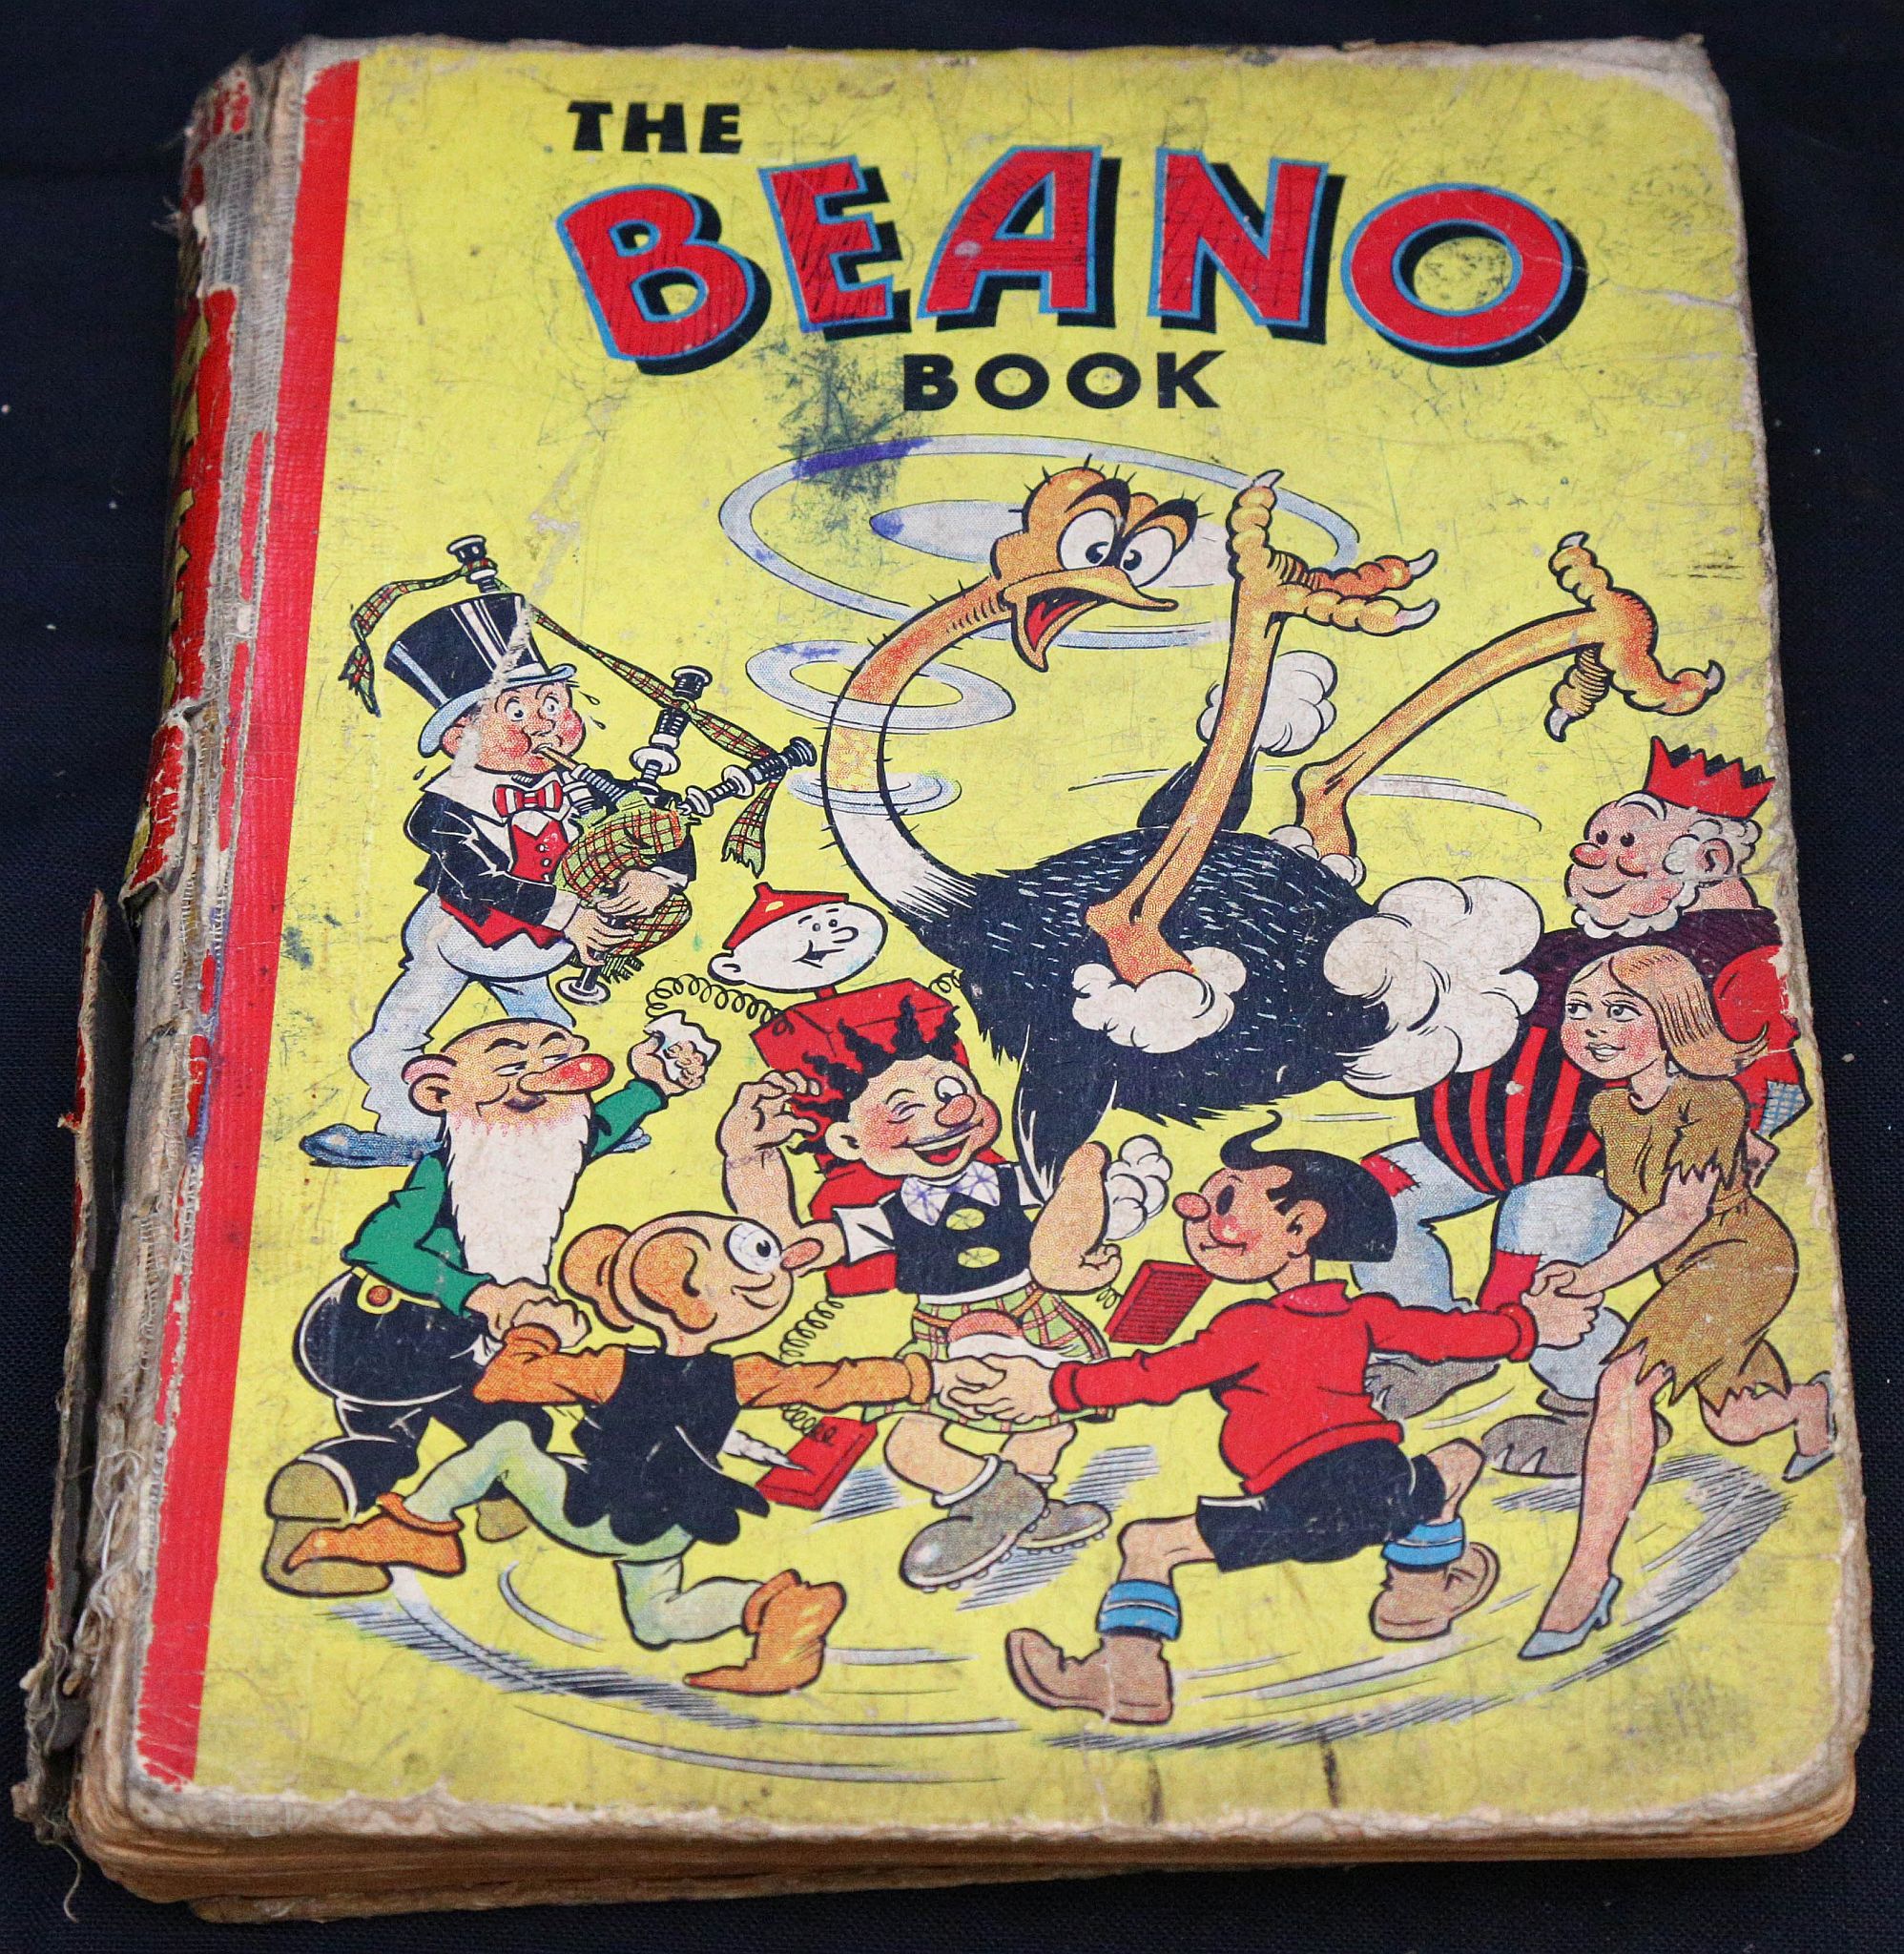 The Beano Book. London: D.C. Thomson & Co. Ltd., [1942]. Folio. (Browning, tearing with some loss at